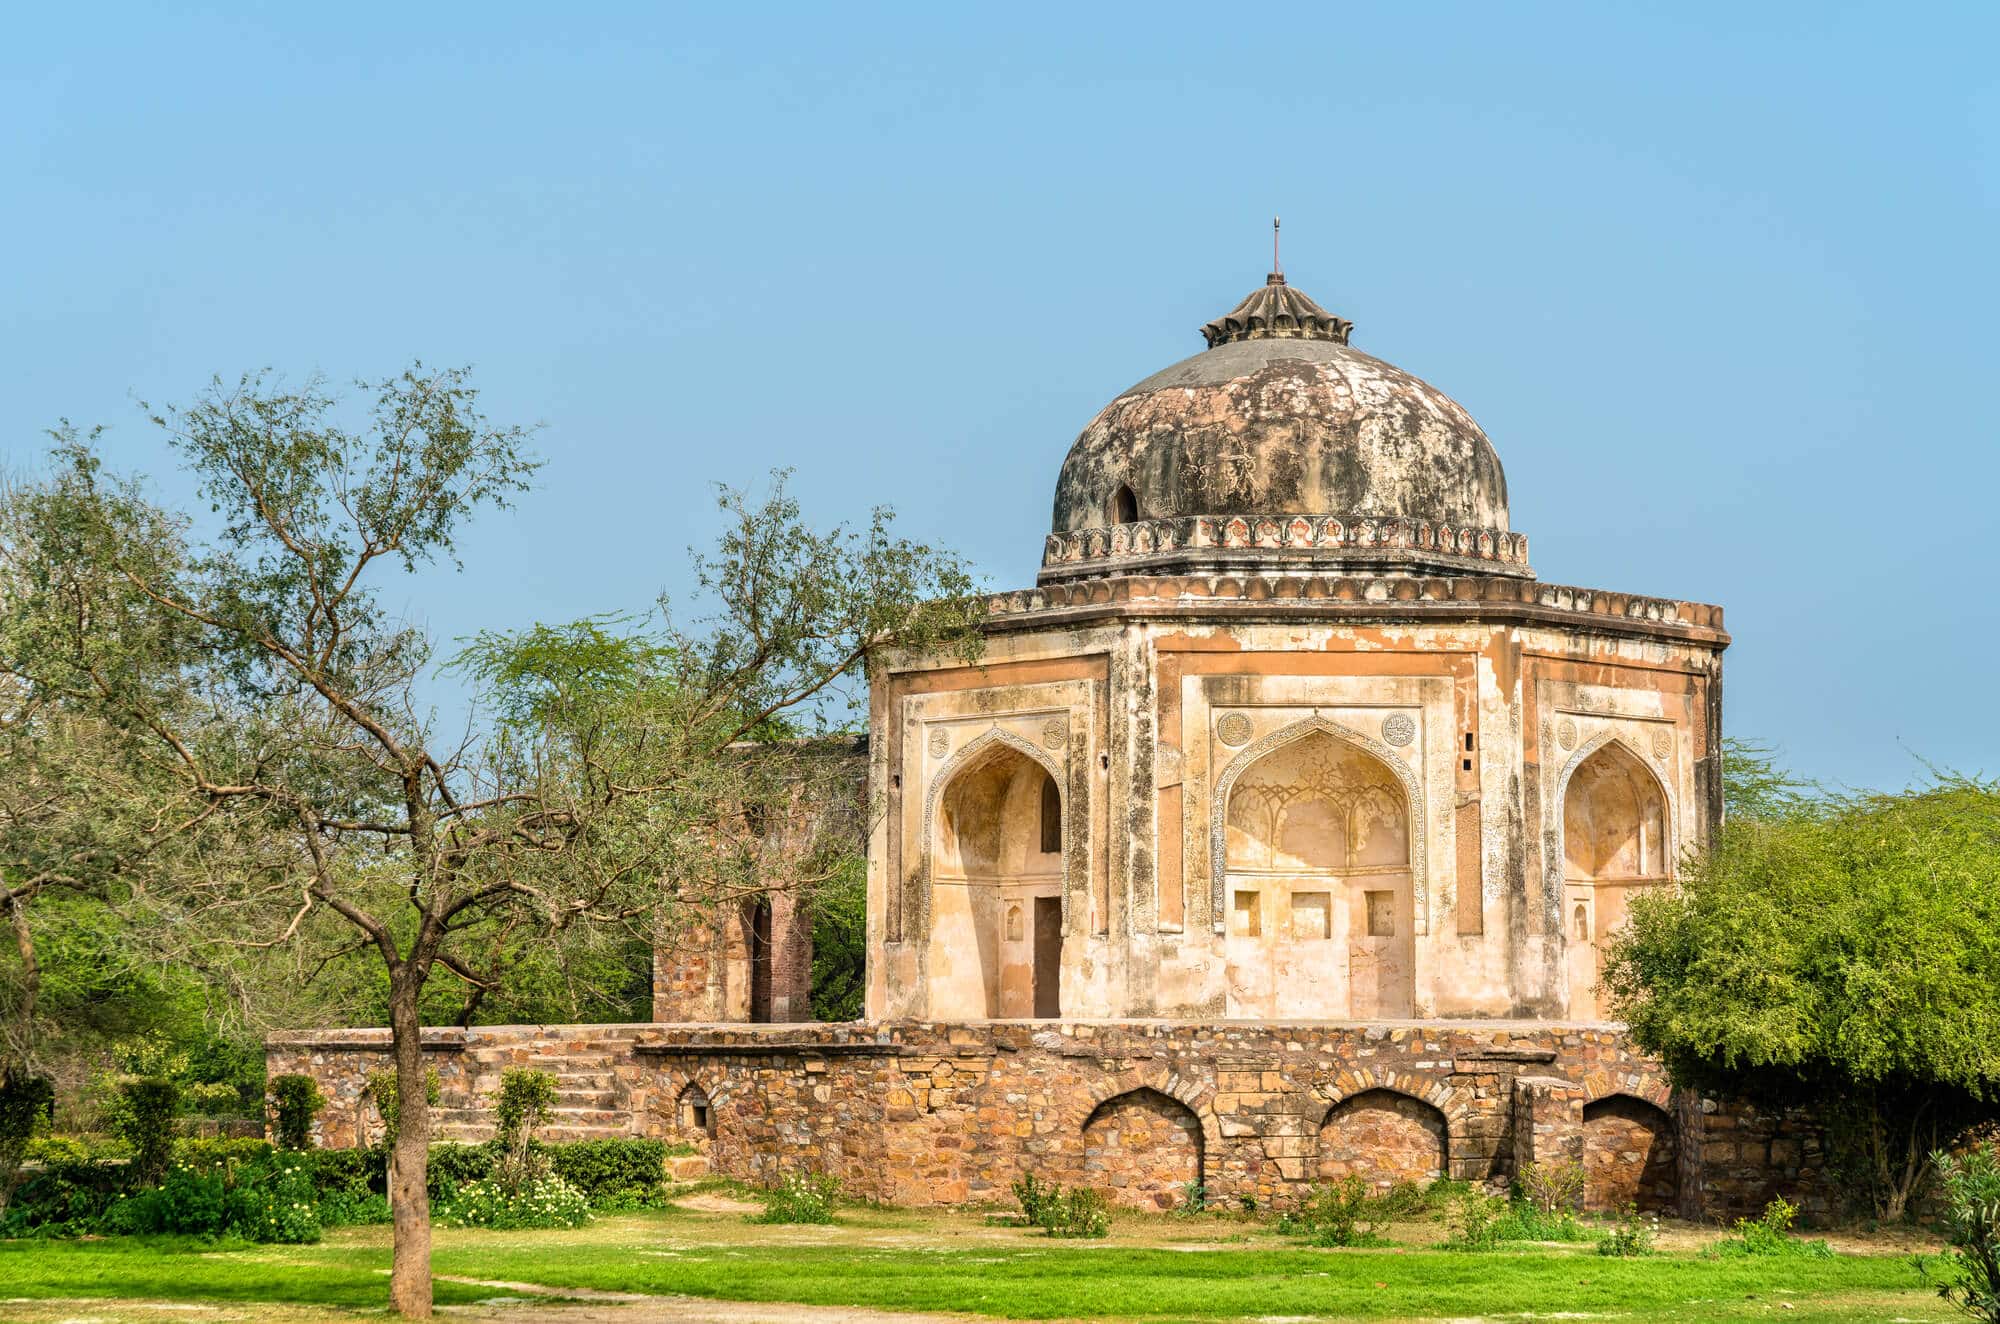 The ultimate 2 day New Delhi itinerary - Mehrauli Archaeological Park